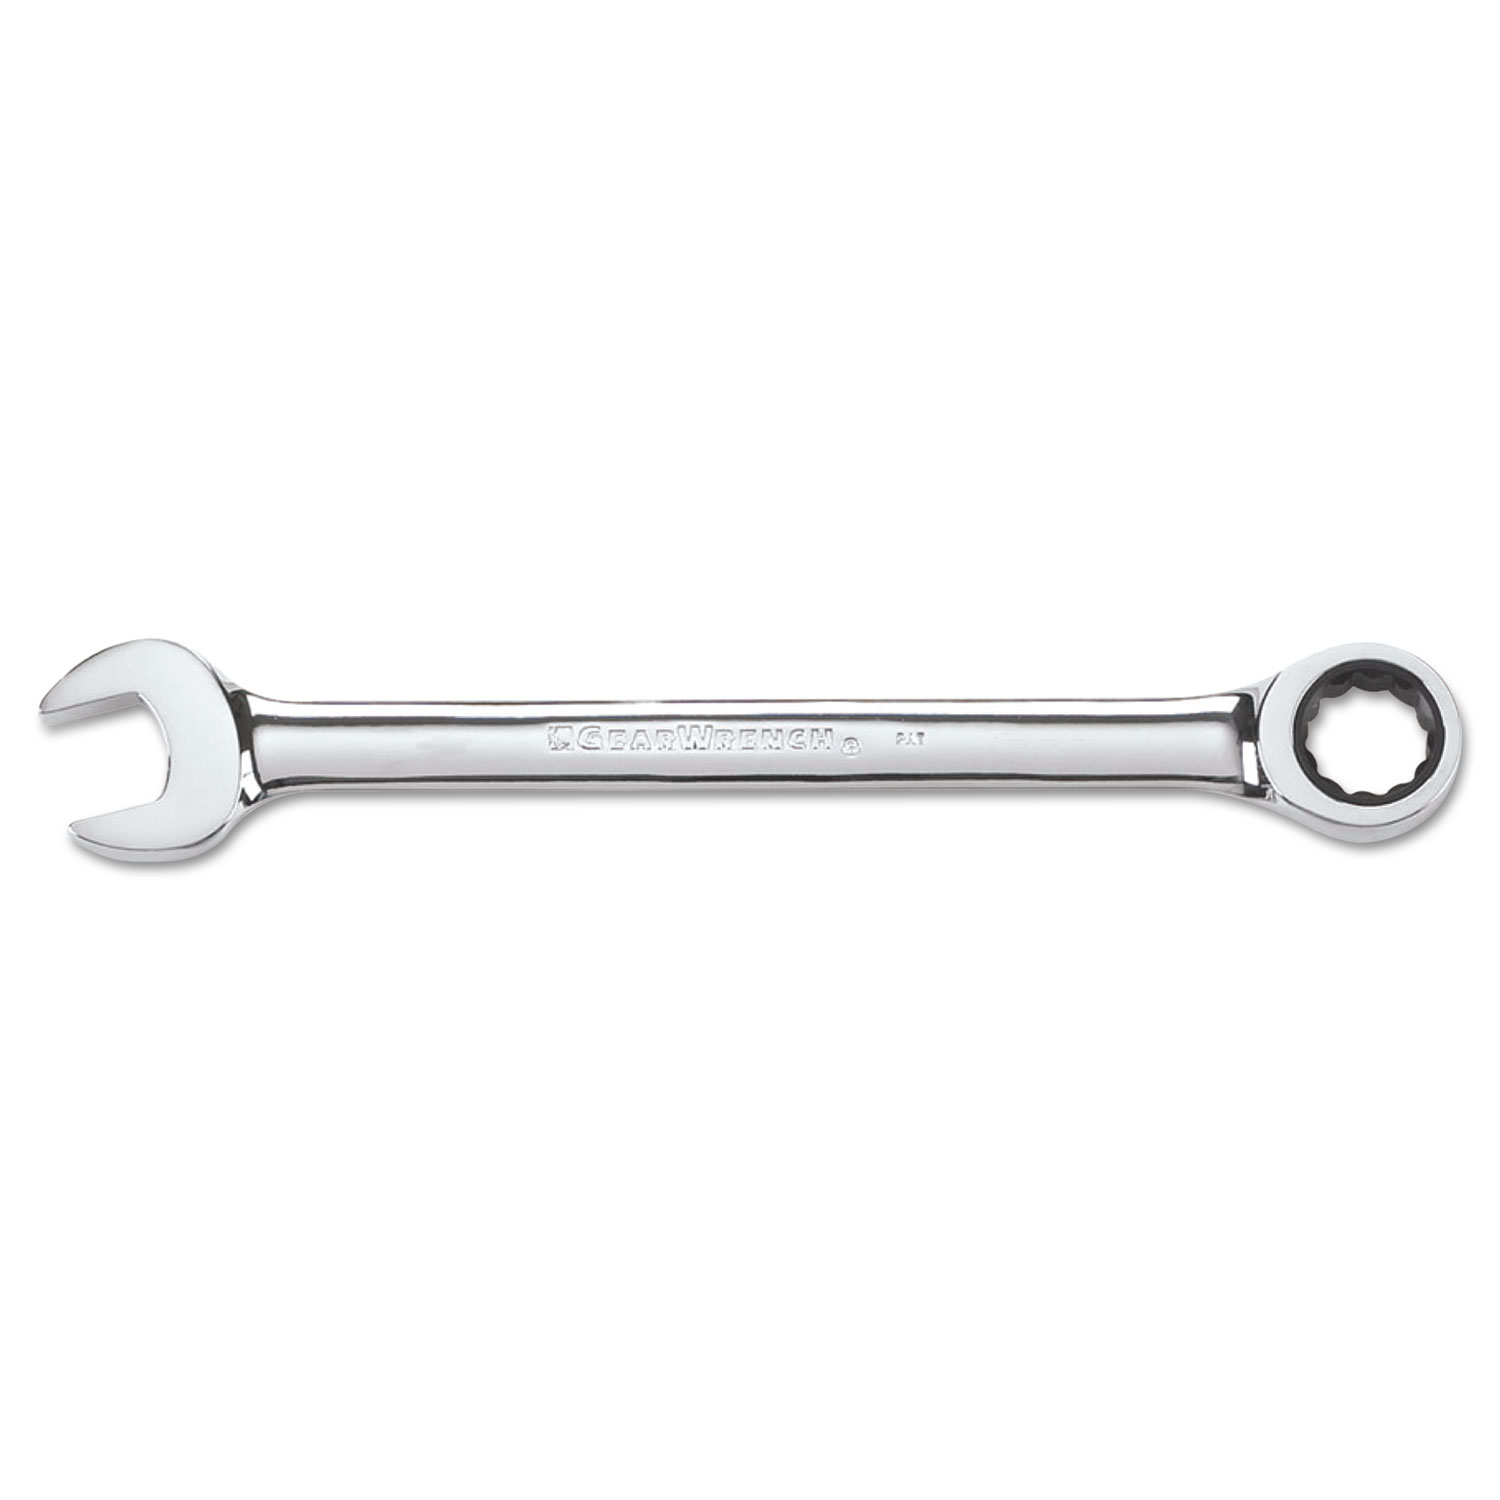 GearWrench Ratcheting Combo Wrench, 11.4 Long, 7/8 Opening, Chrome Finish